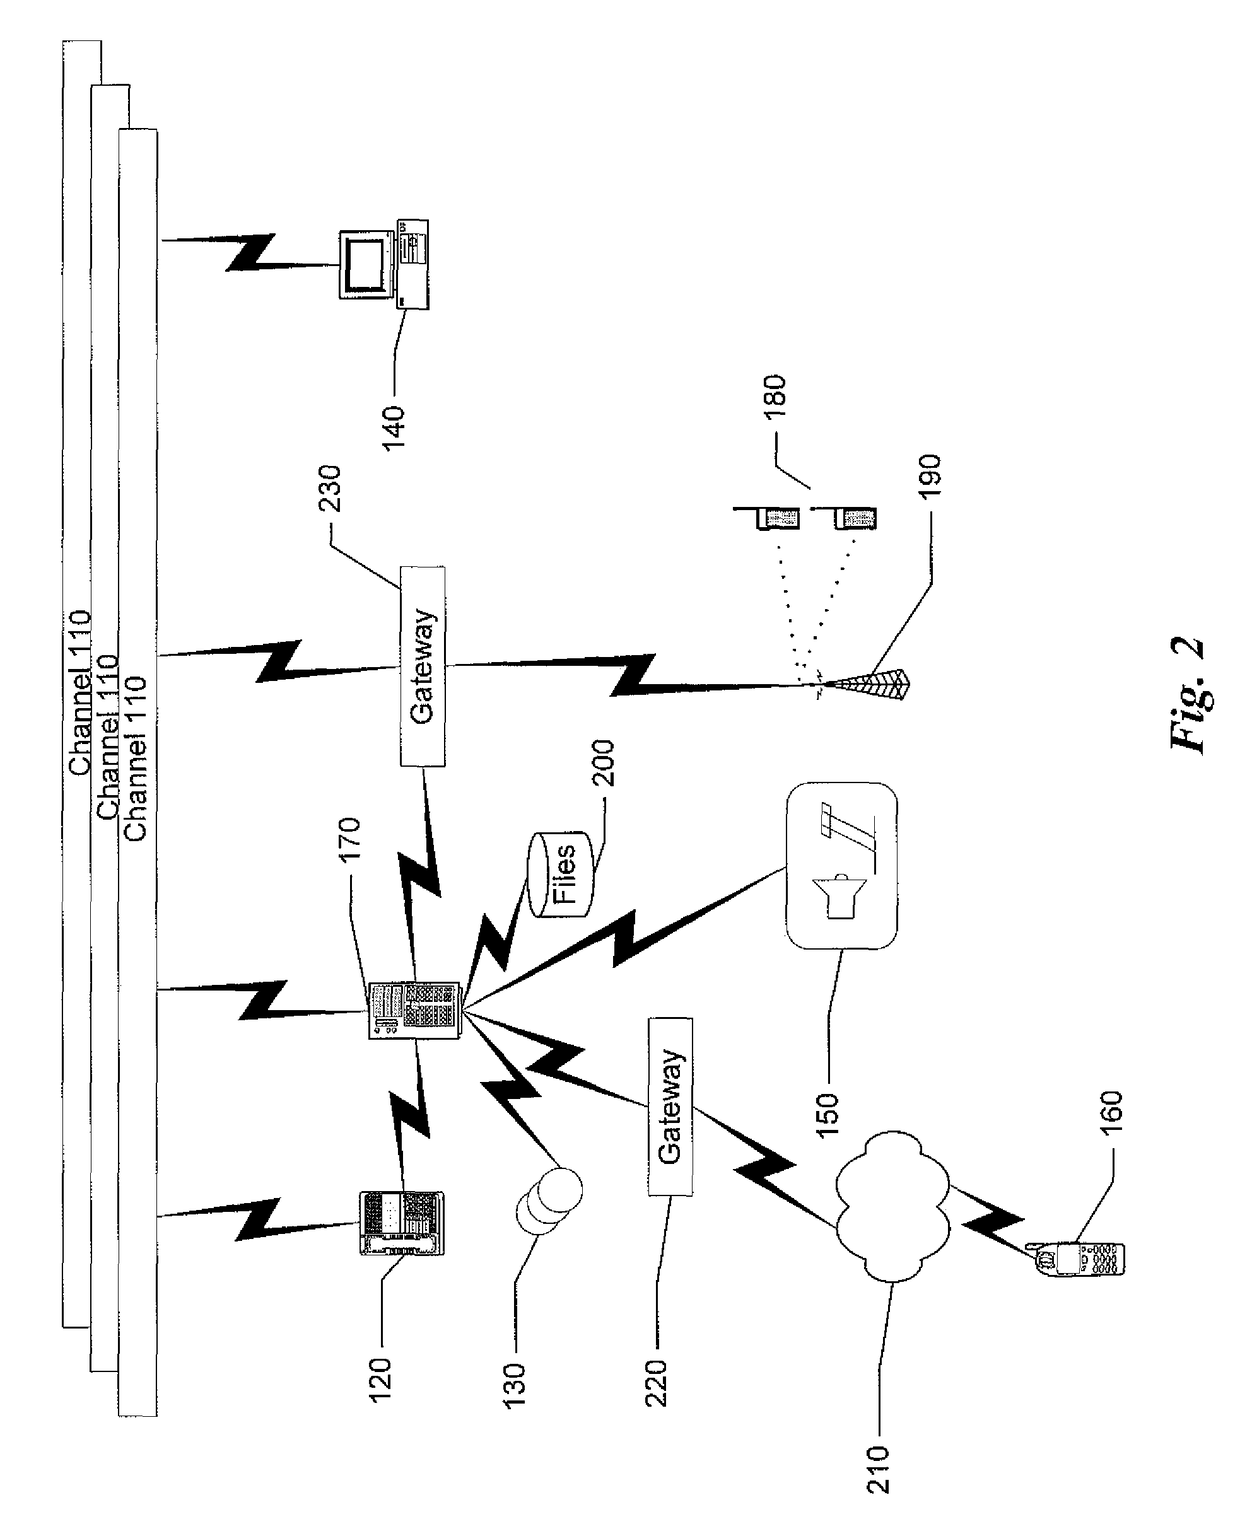 Wide area voice environment multi-channel communications system and method